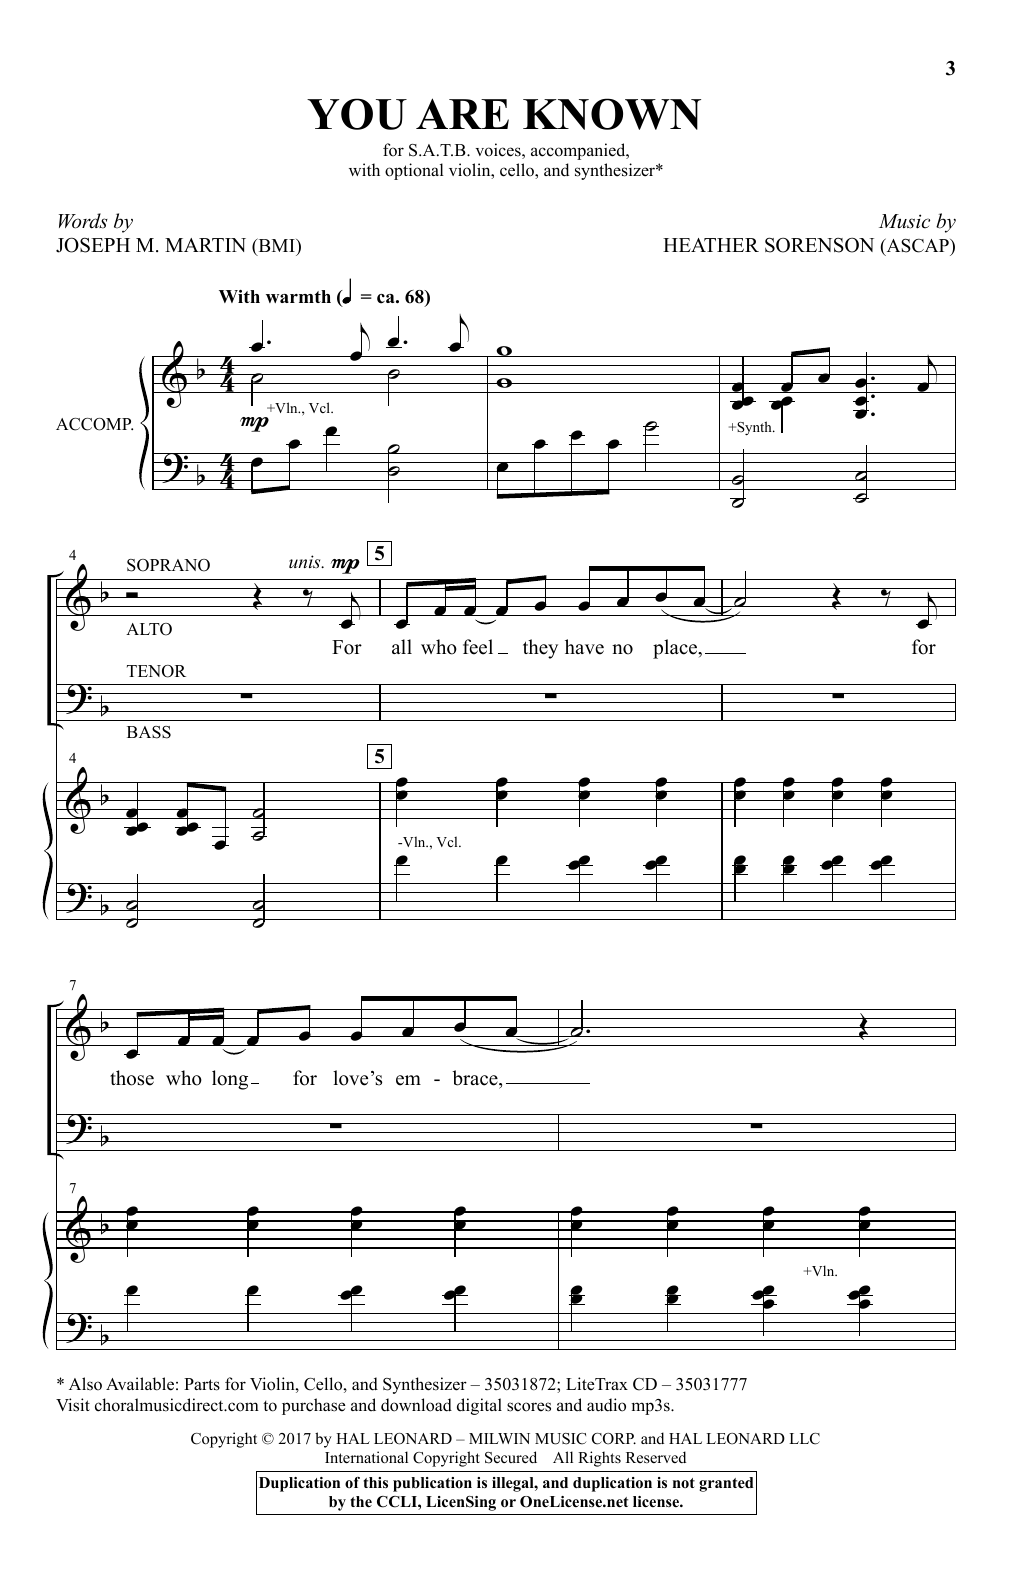 Download Heather Sorenson You Are Known Sheet Music